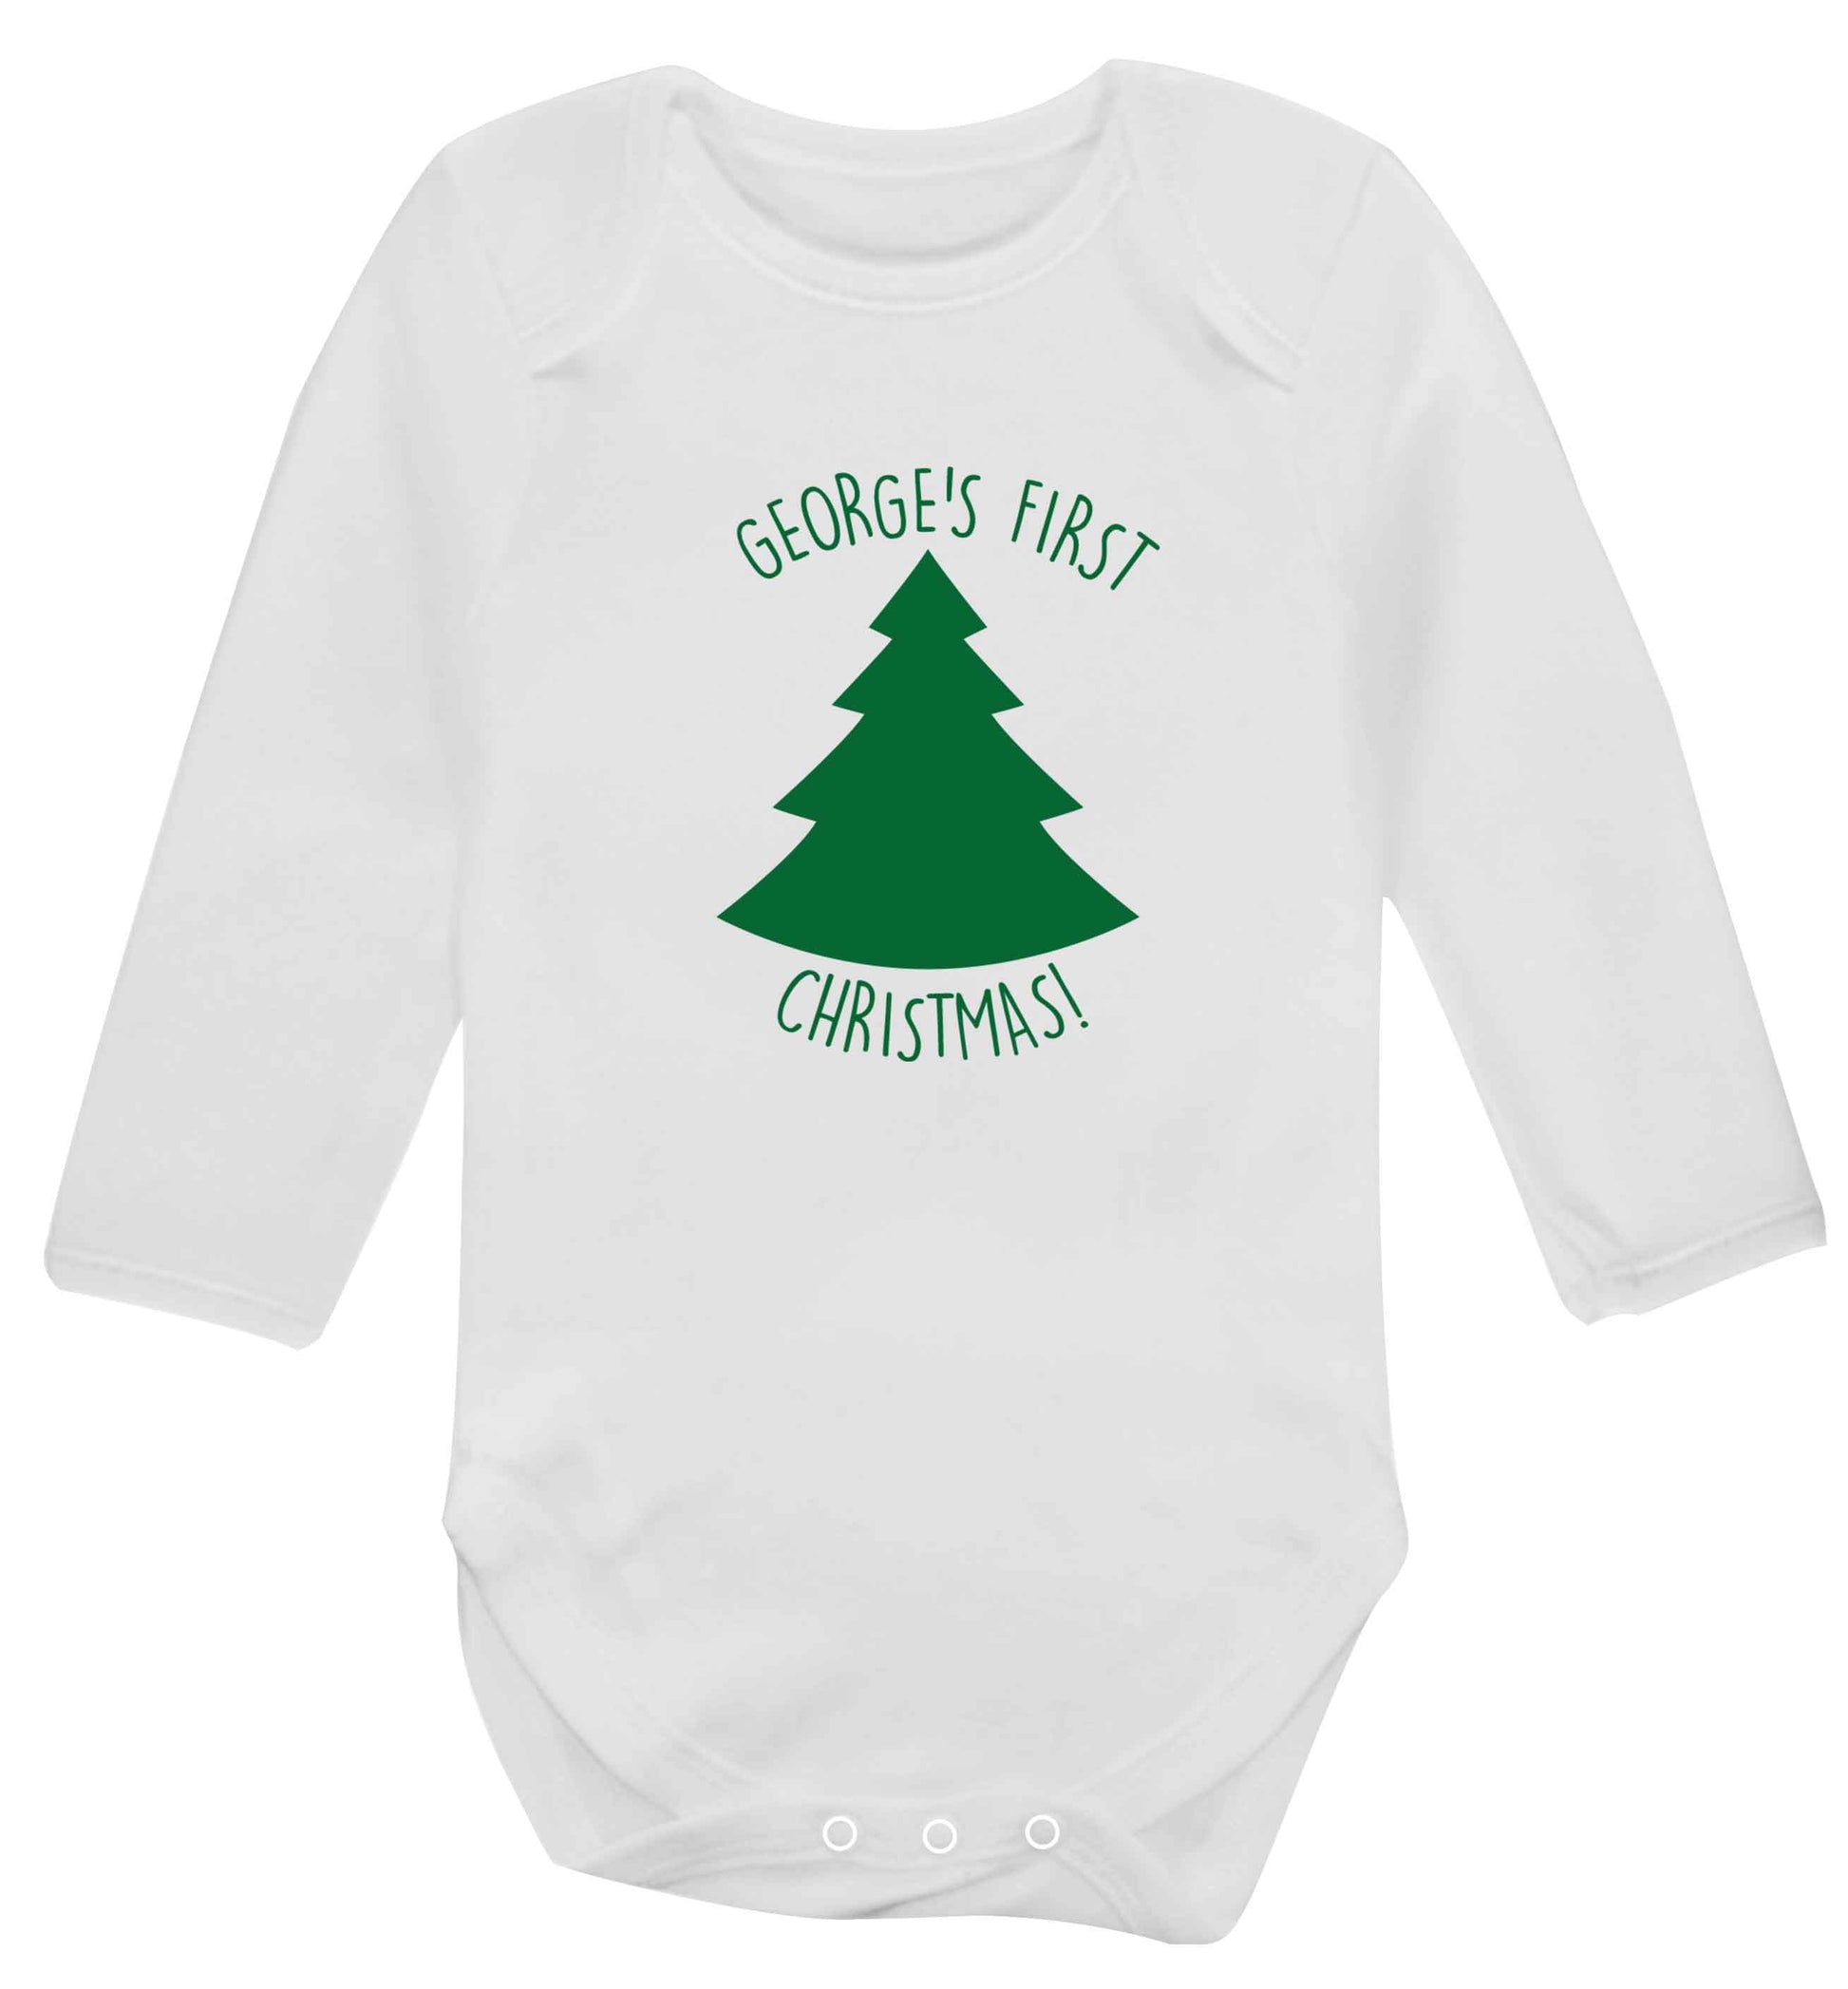 Personalised it's my first Christmas - tree baby vest long sleeved white 6-12 months